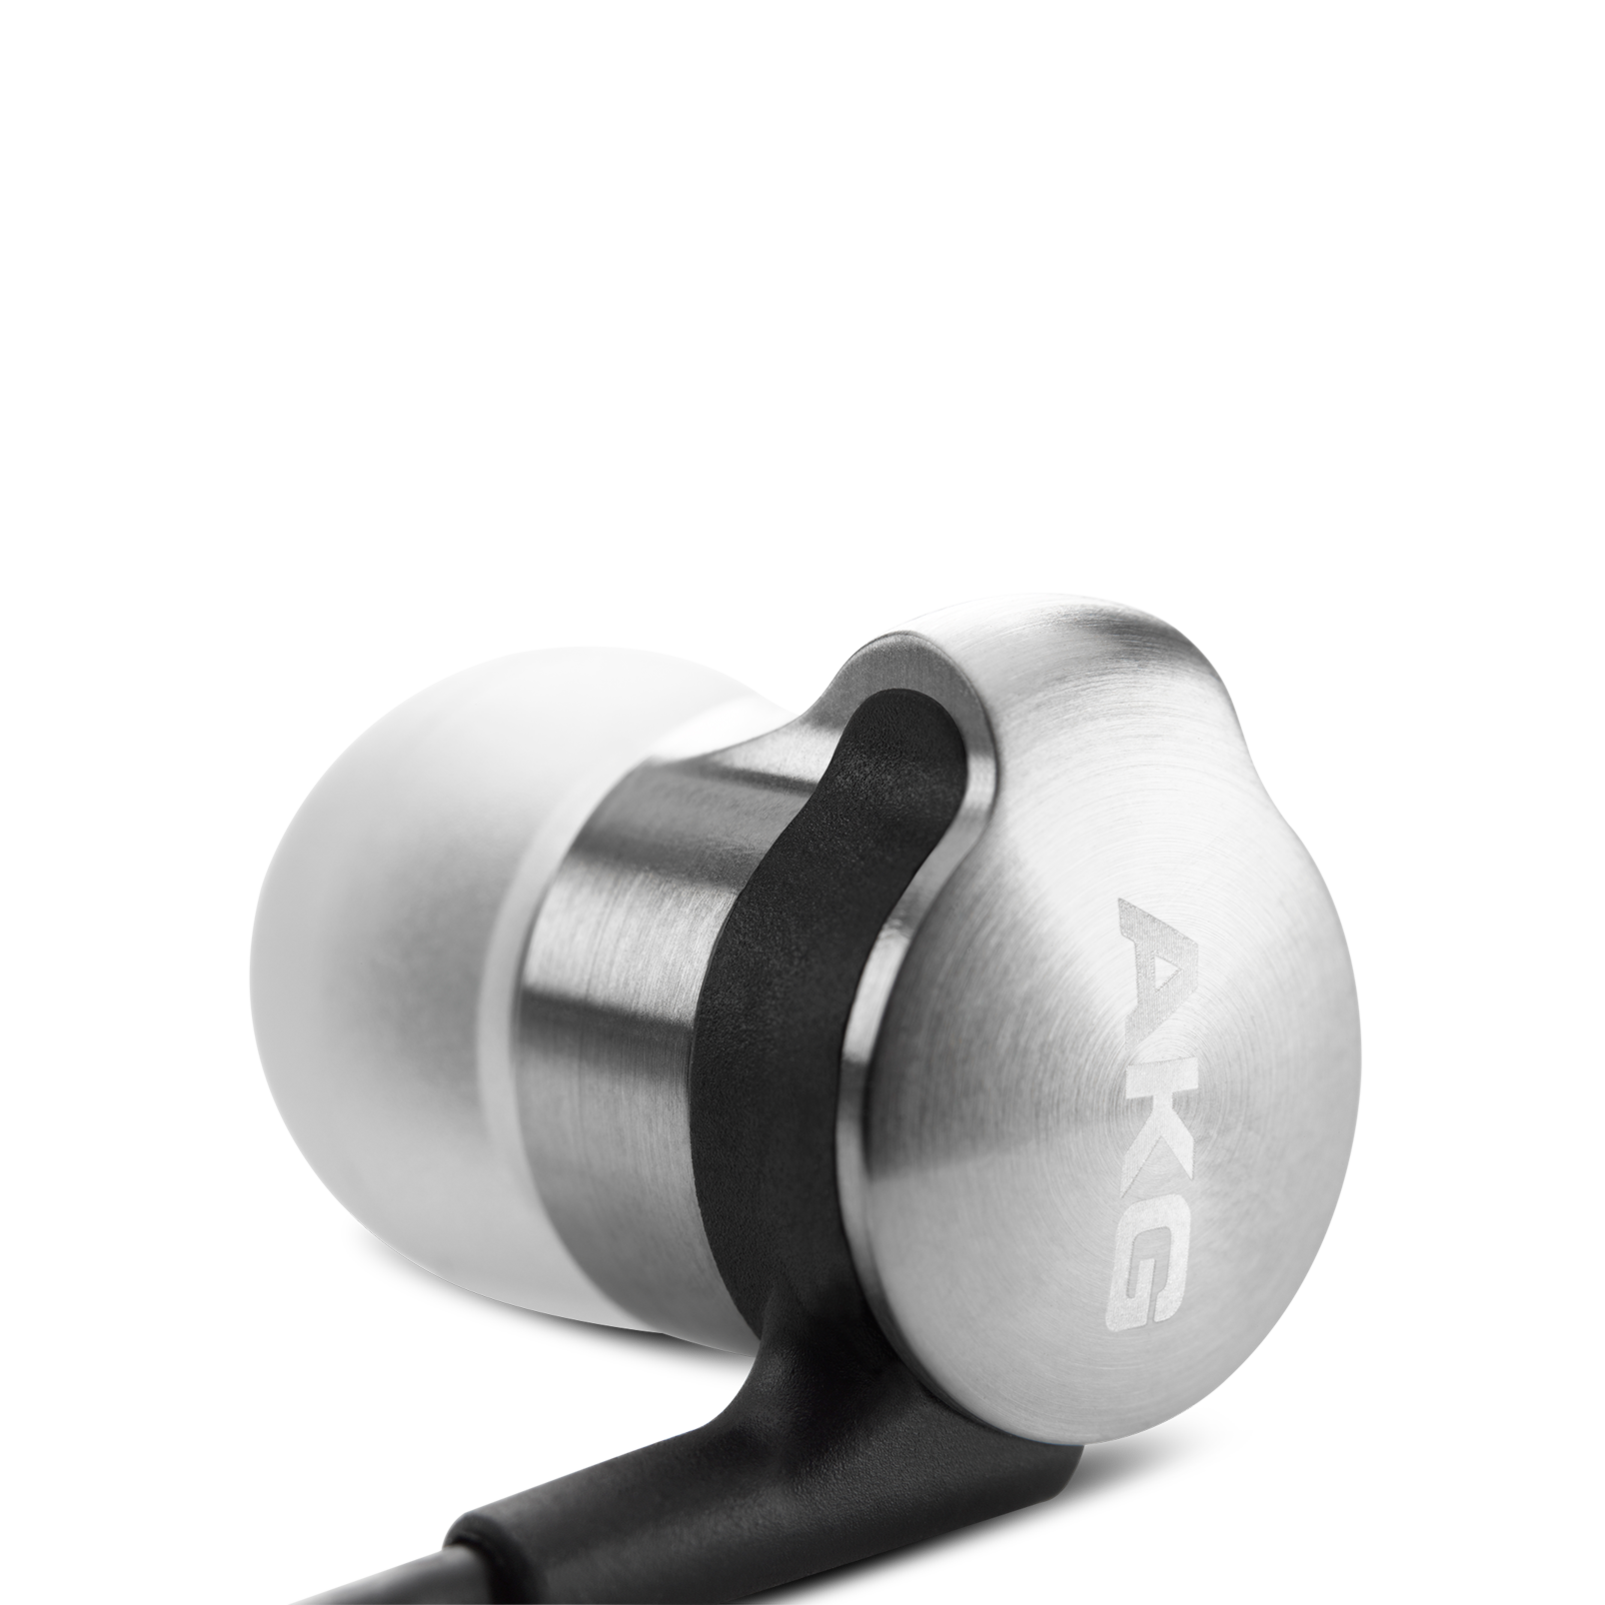 K3003 - Aluminum - Reference class 3-way earphones delivering leyu reference sound. - Hero